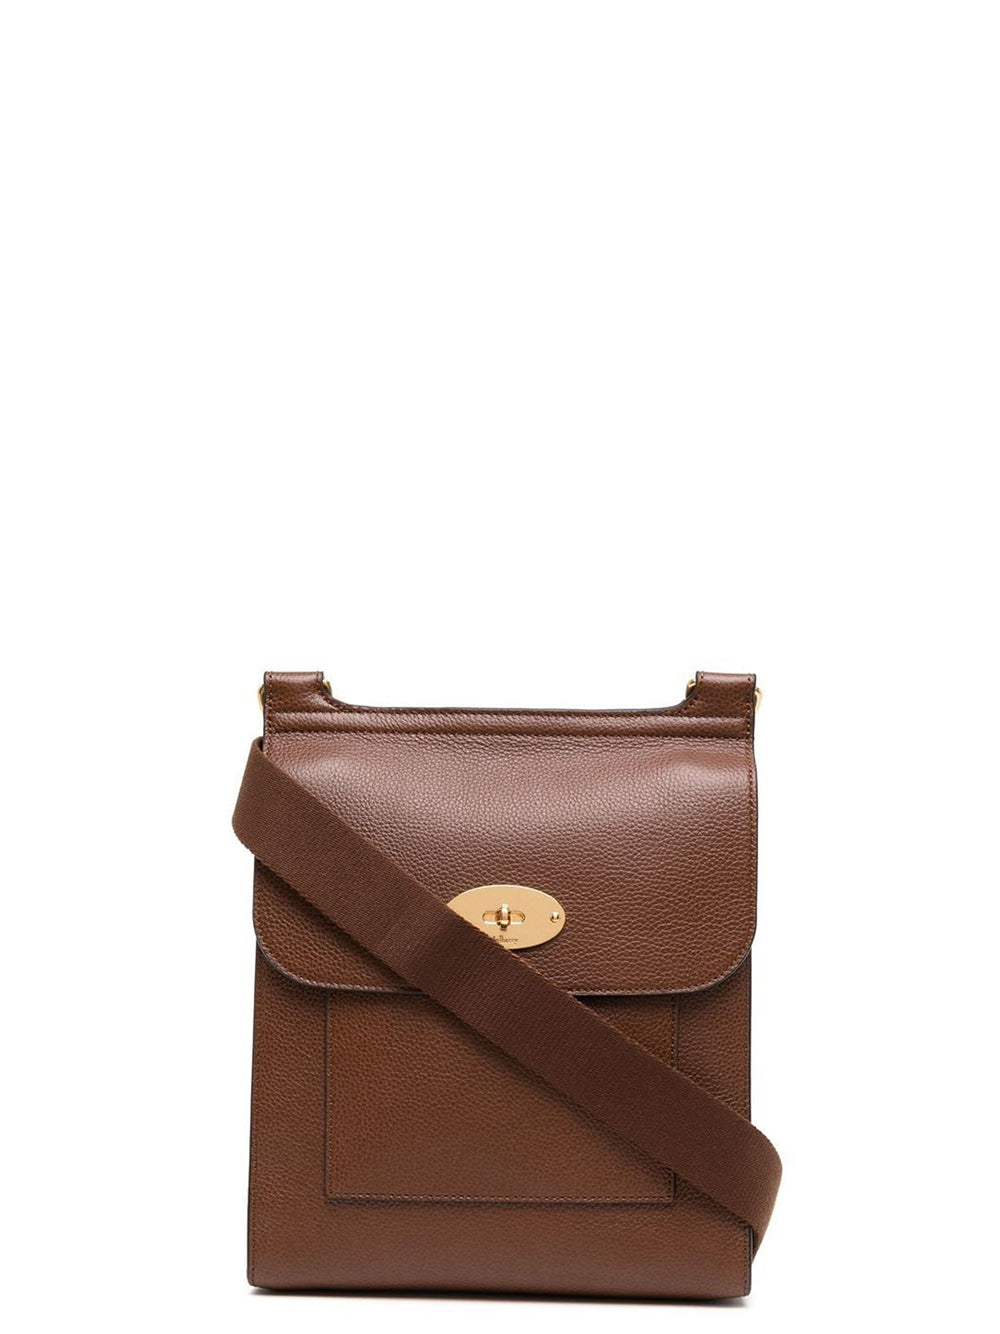 Mulberry-Antony-N-Two-Tone-Small-Classic-Grain-Brown-1